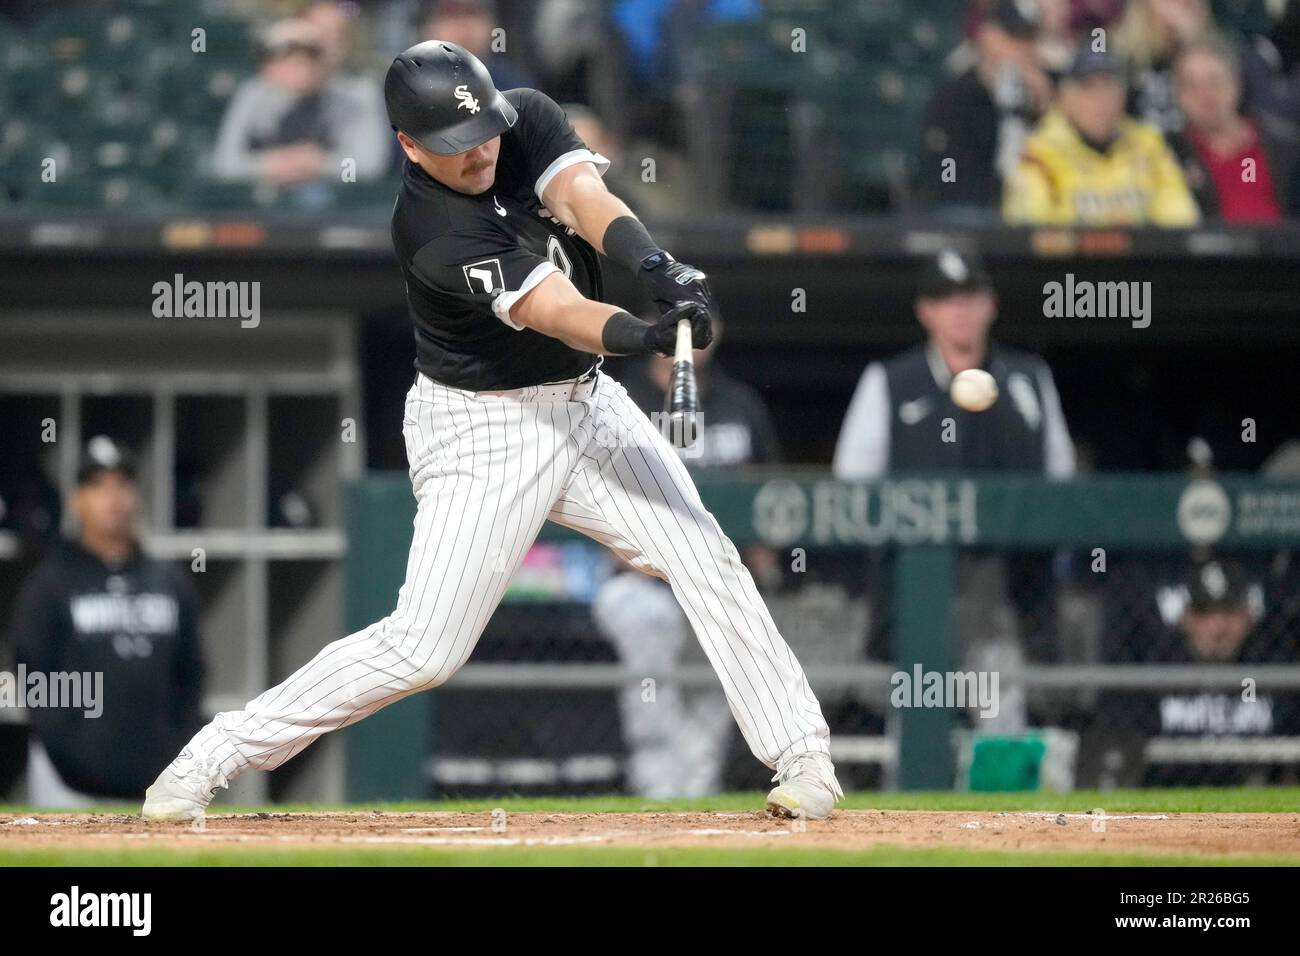 Chicago White Sox's Jake Burger swings at a pitch in a baseball